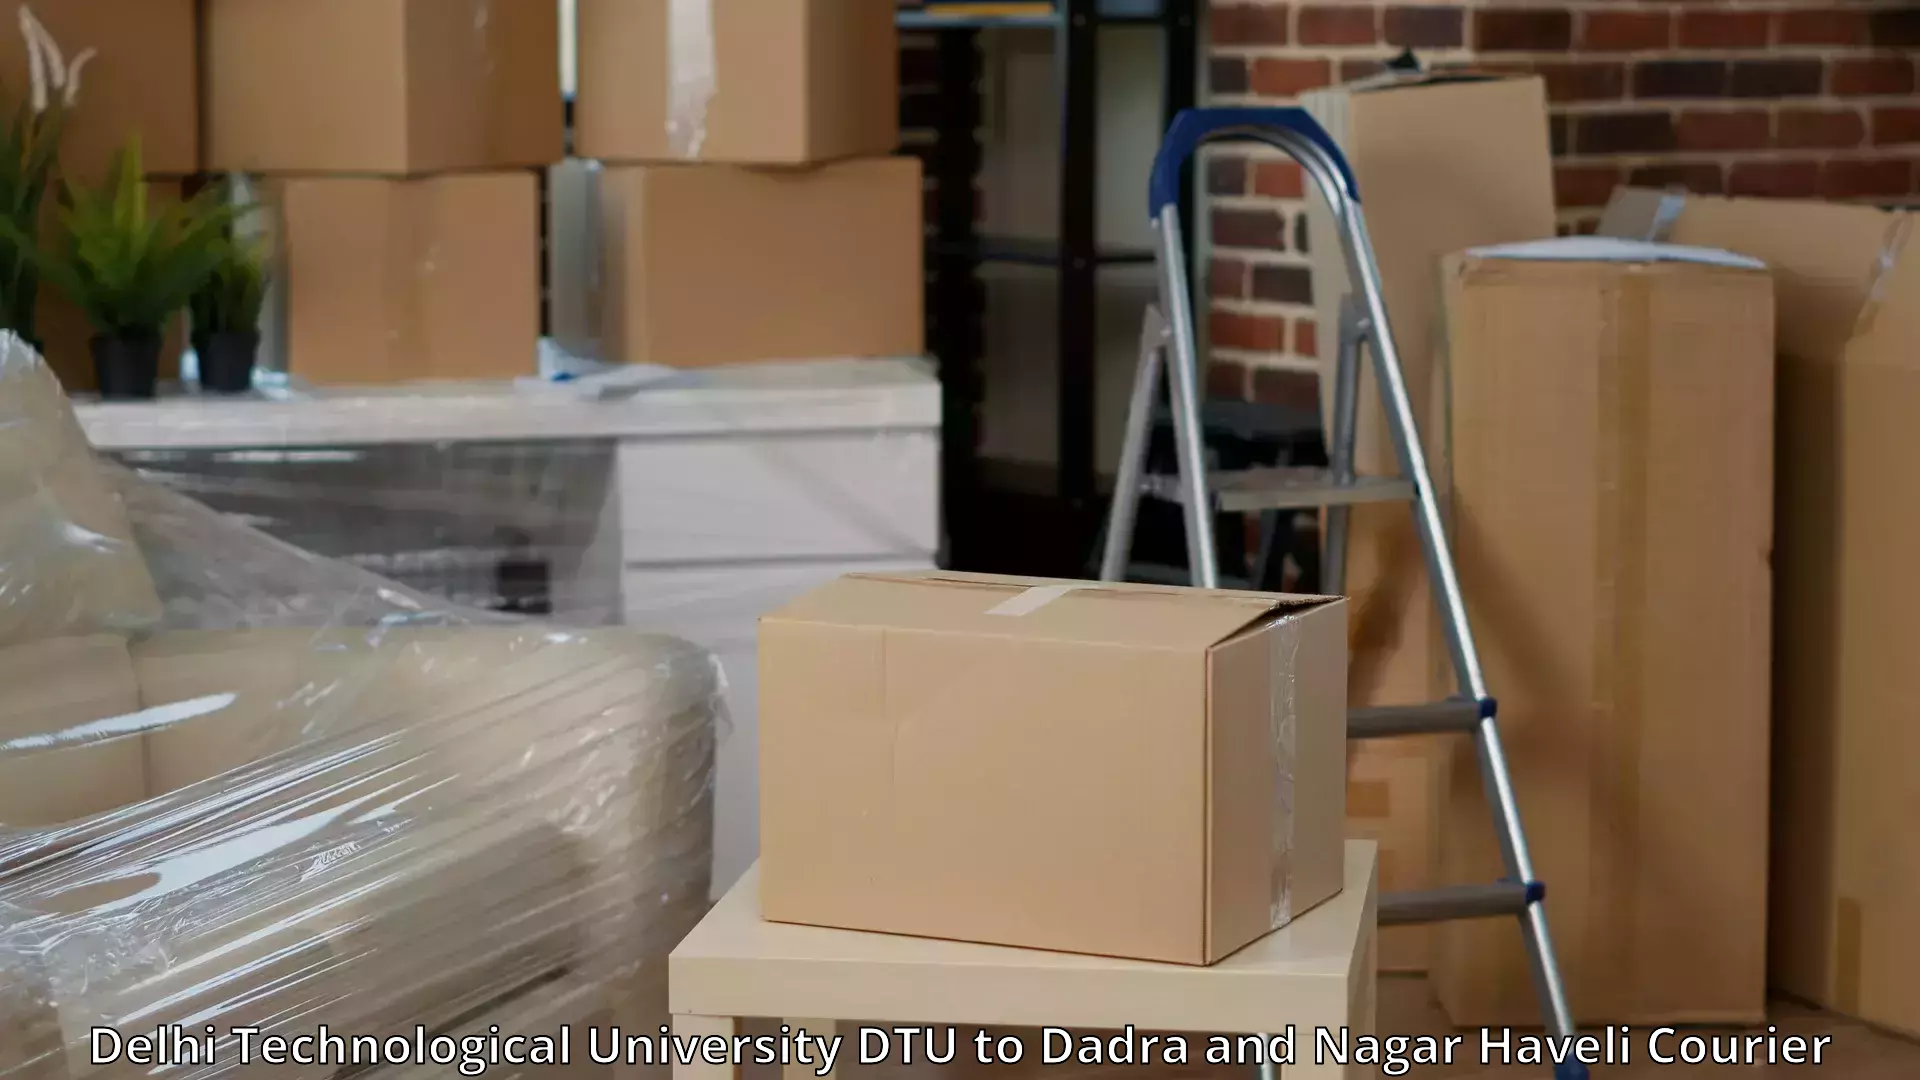 Quality moving services Delhi Technological University DTU to Dadra and Nagar Haveli